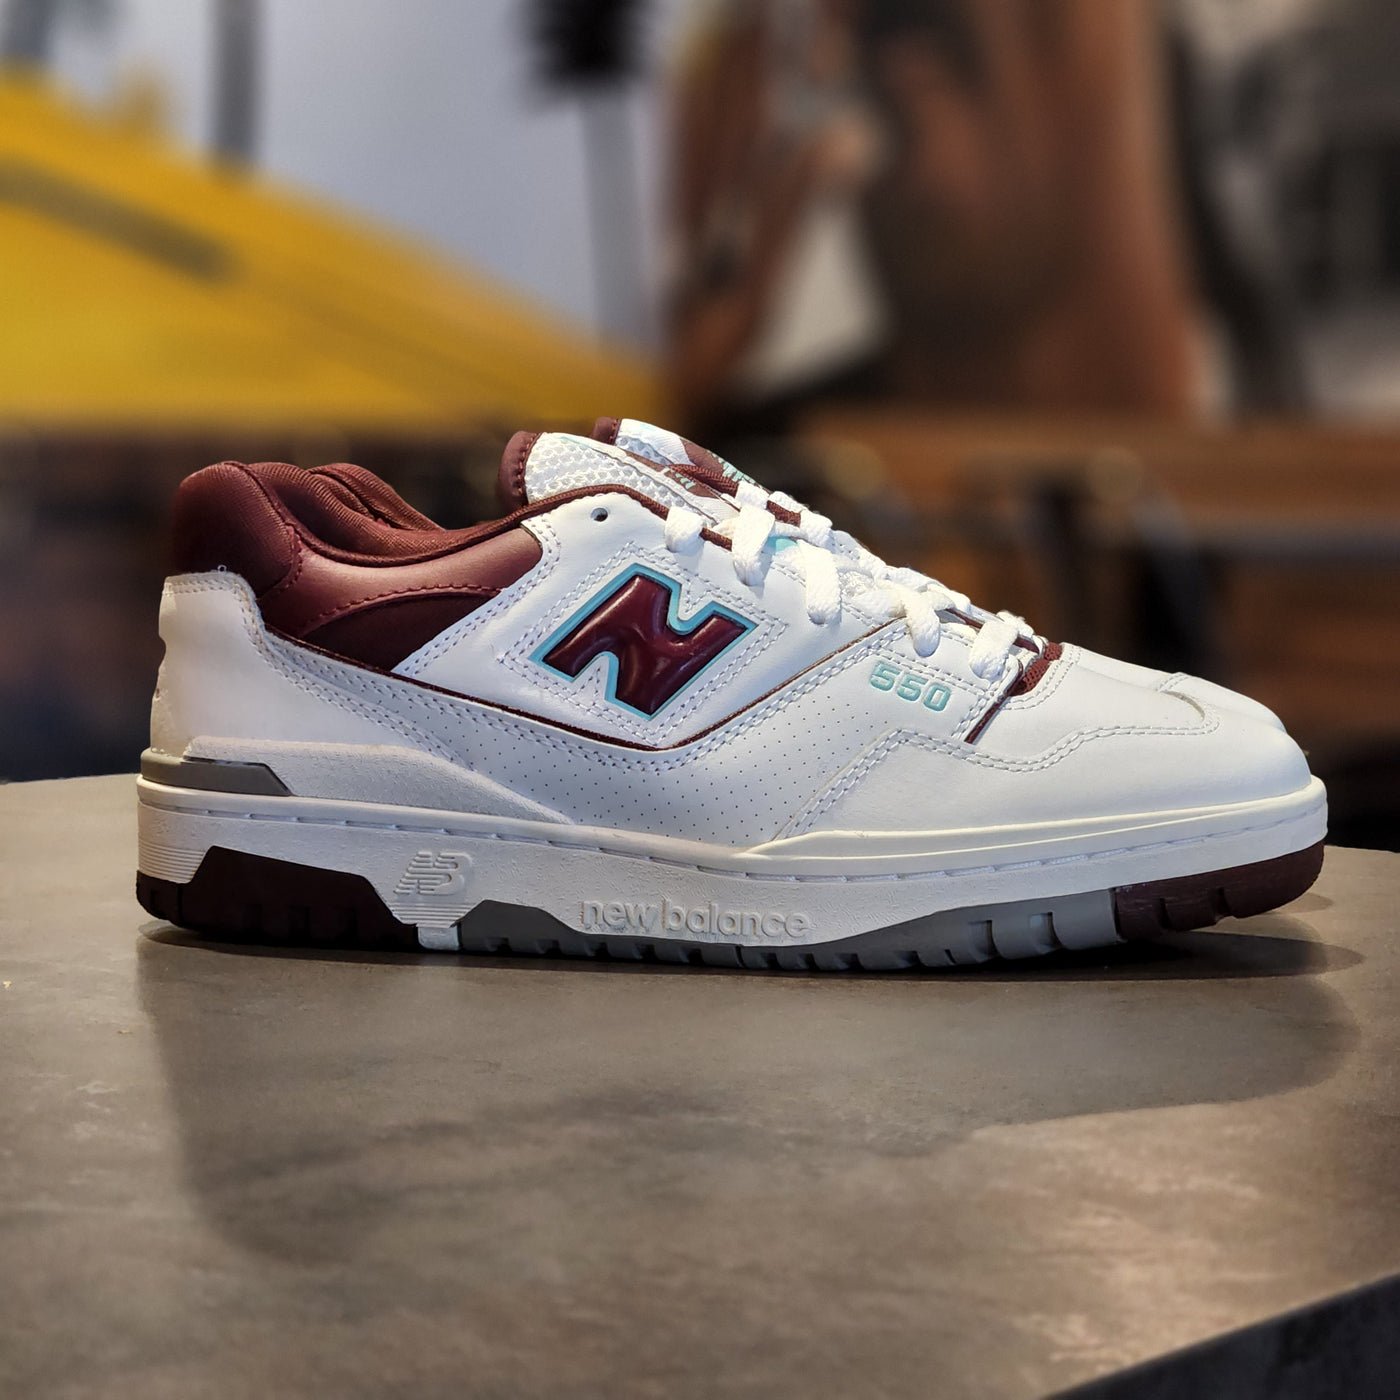 New Balance 550 Burgundy Review & On-Foot Look 